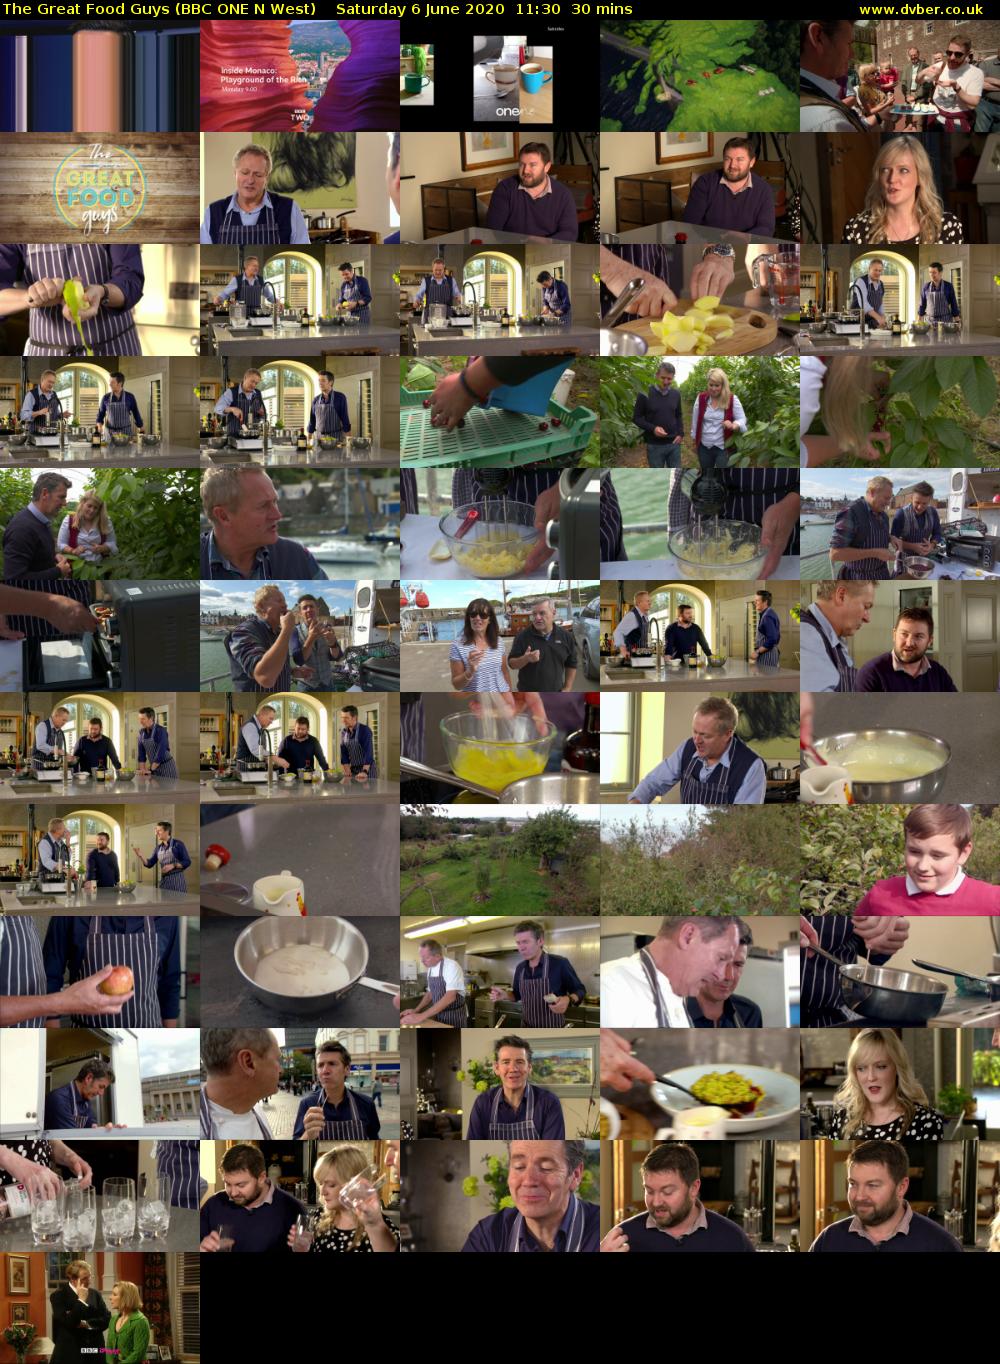 The Great Food Guys (BBC ONE N West) Saturday 6 June 2020 11:30 - 12:00